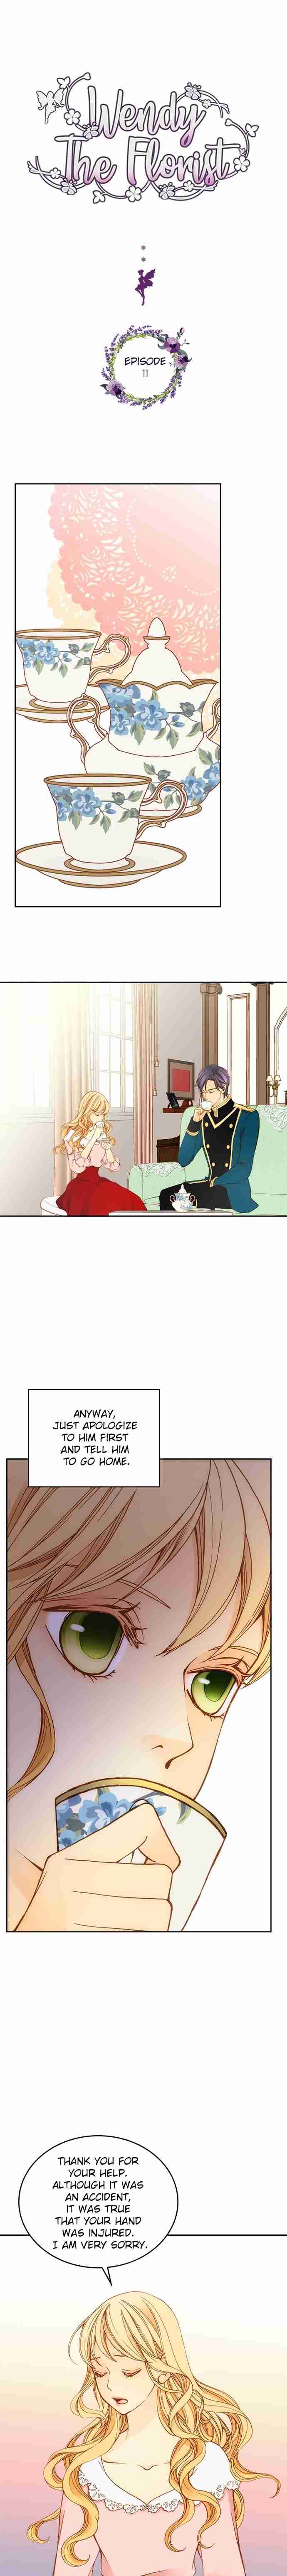 Wendy the Florist Ch. 11